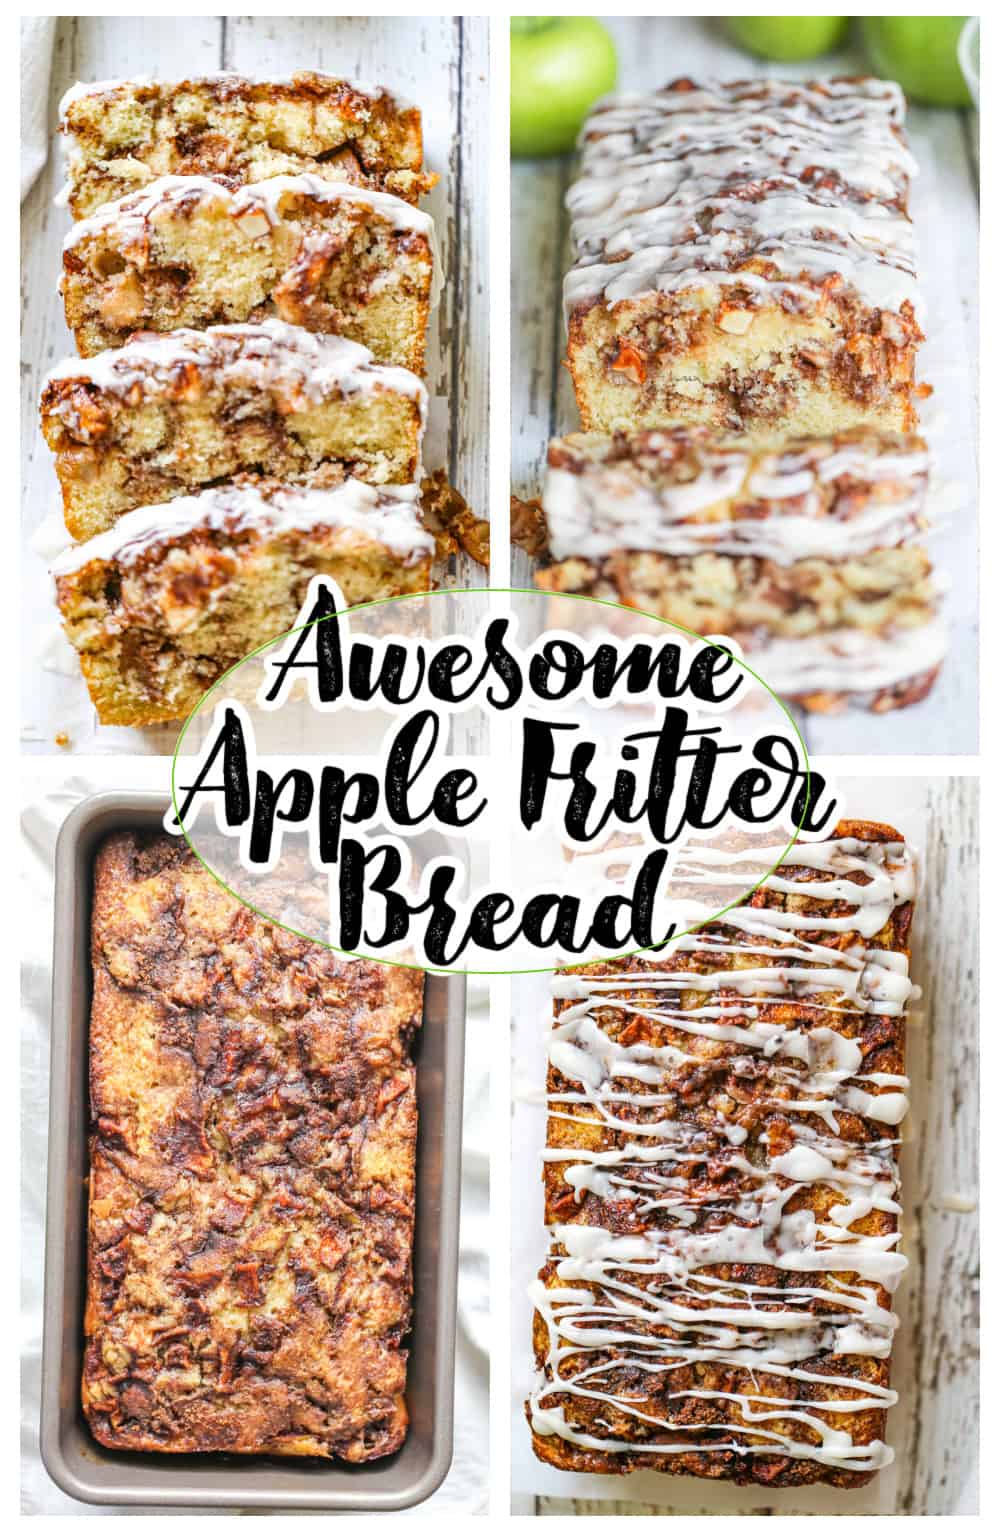 apple fritter bread, Awesome Country Apple Fritter Bread!